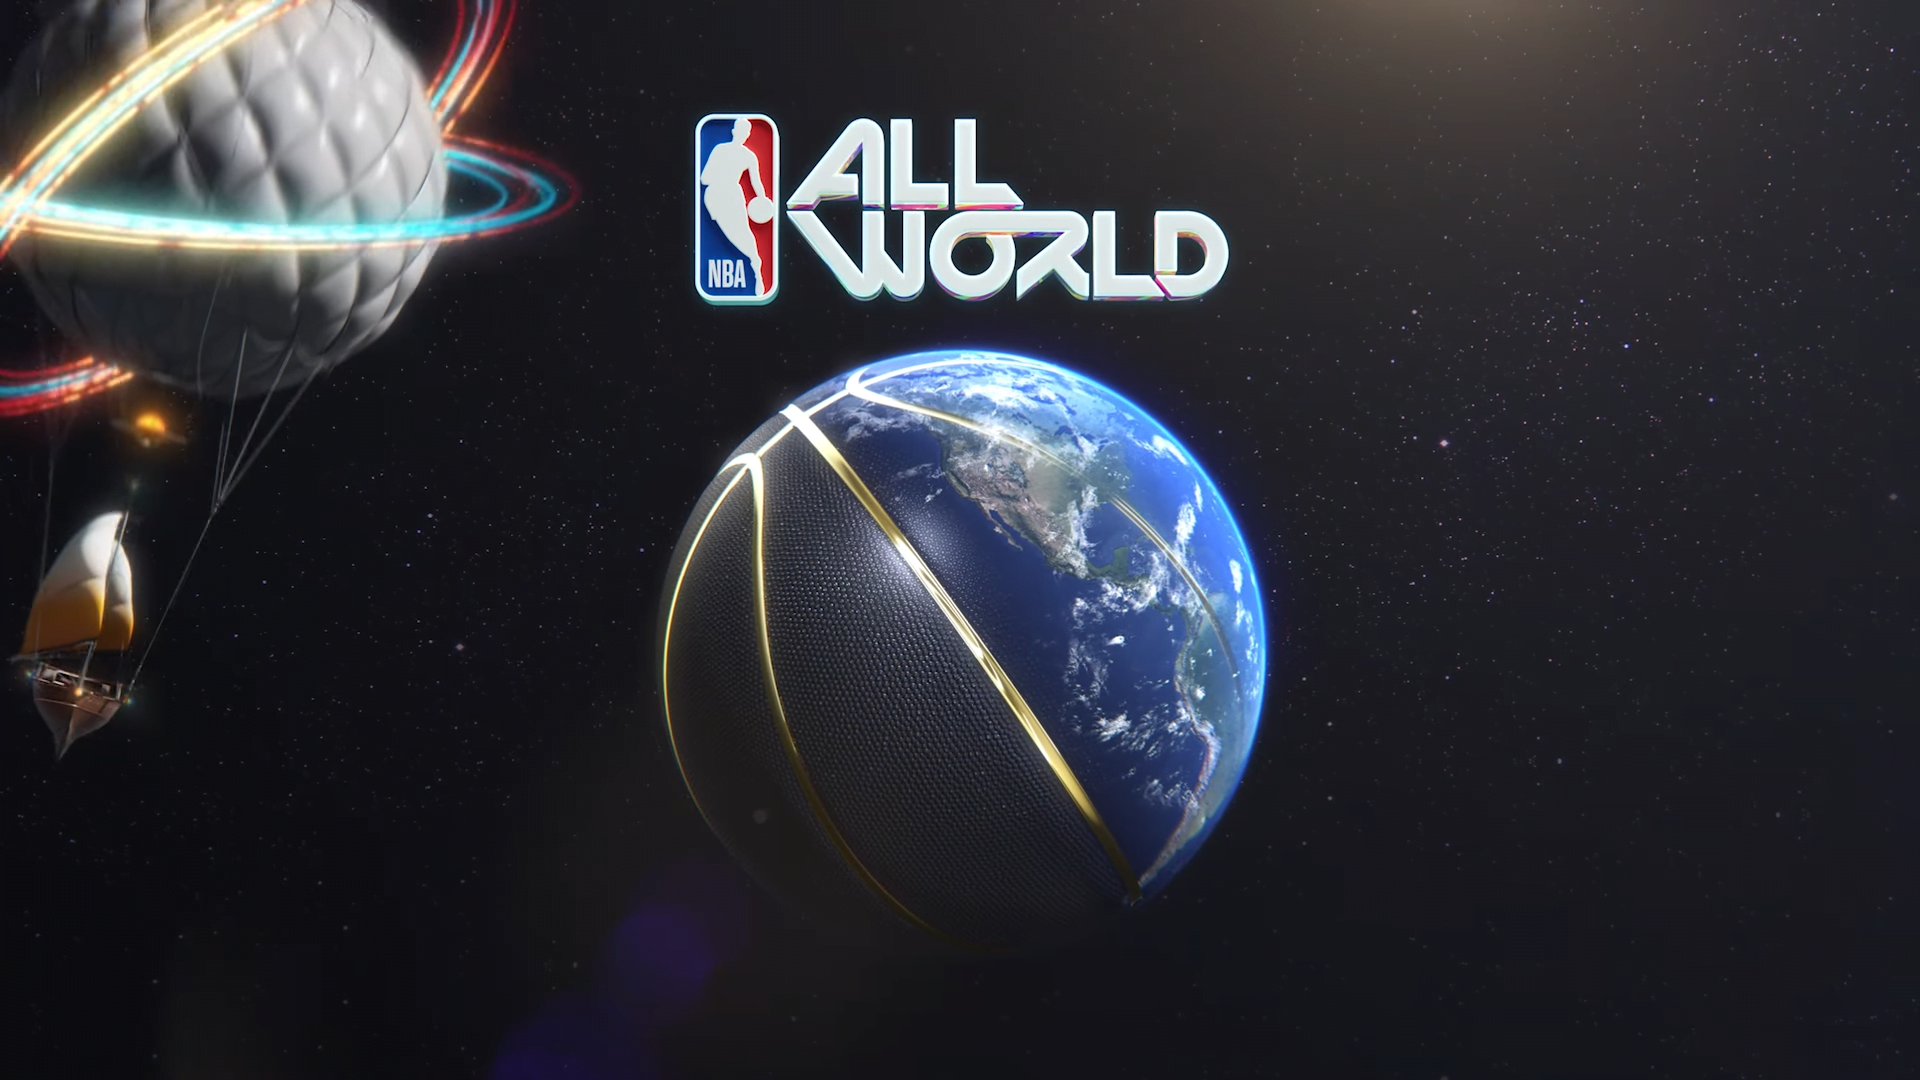 In Niantic's NBA All World you collect sports stars instead of Pokémon